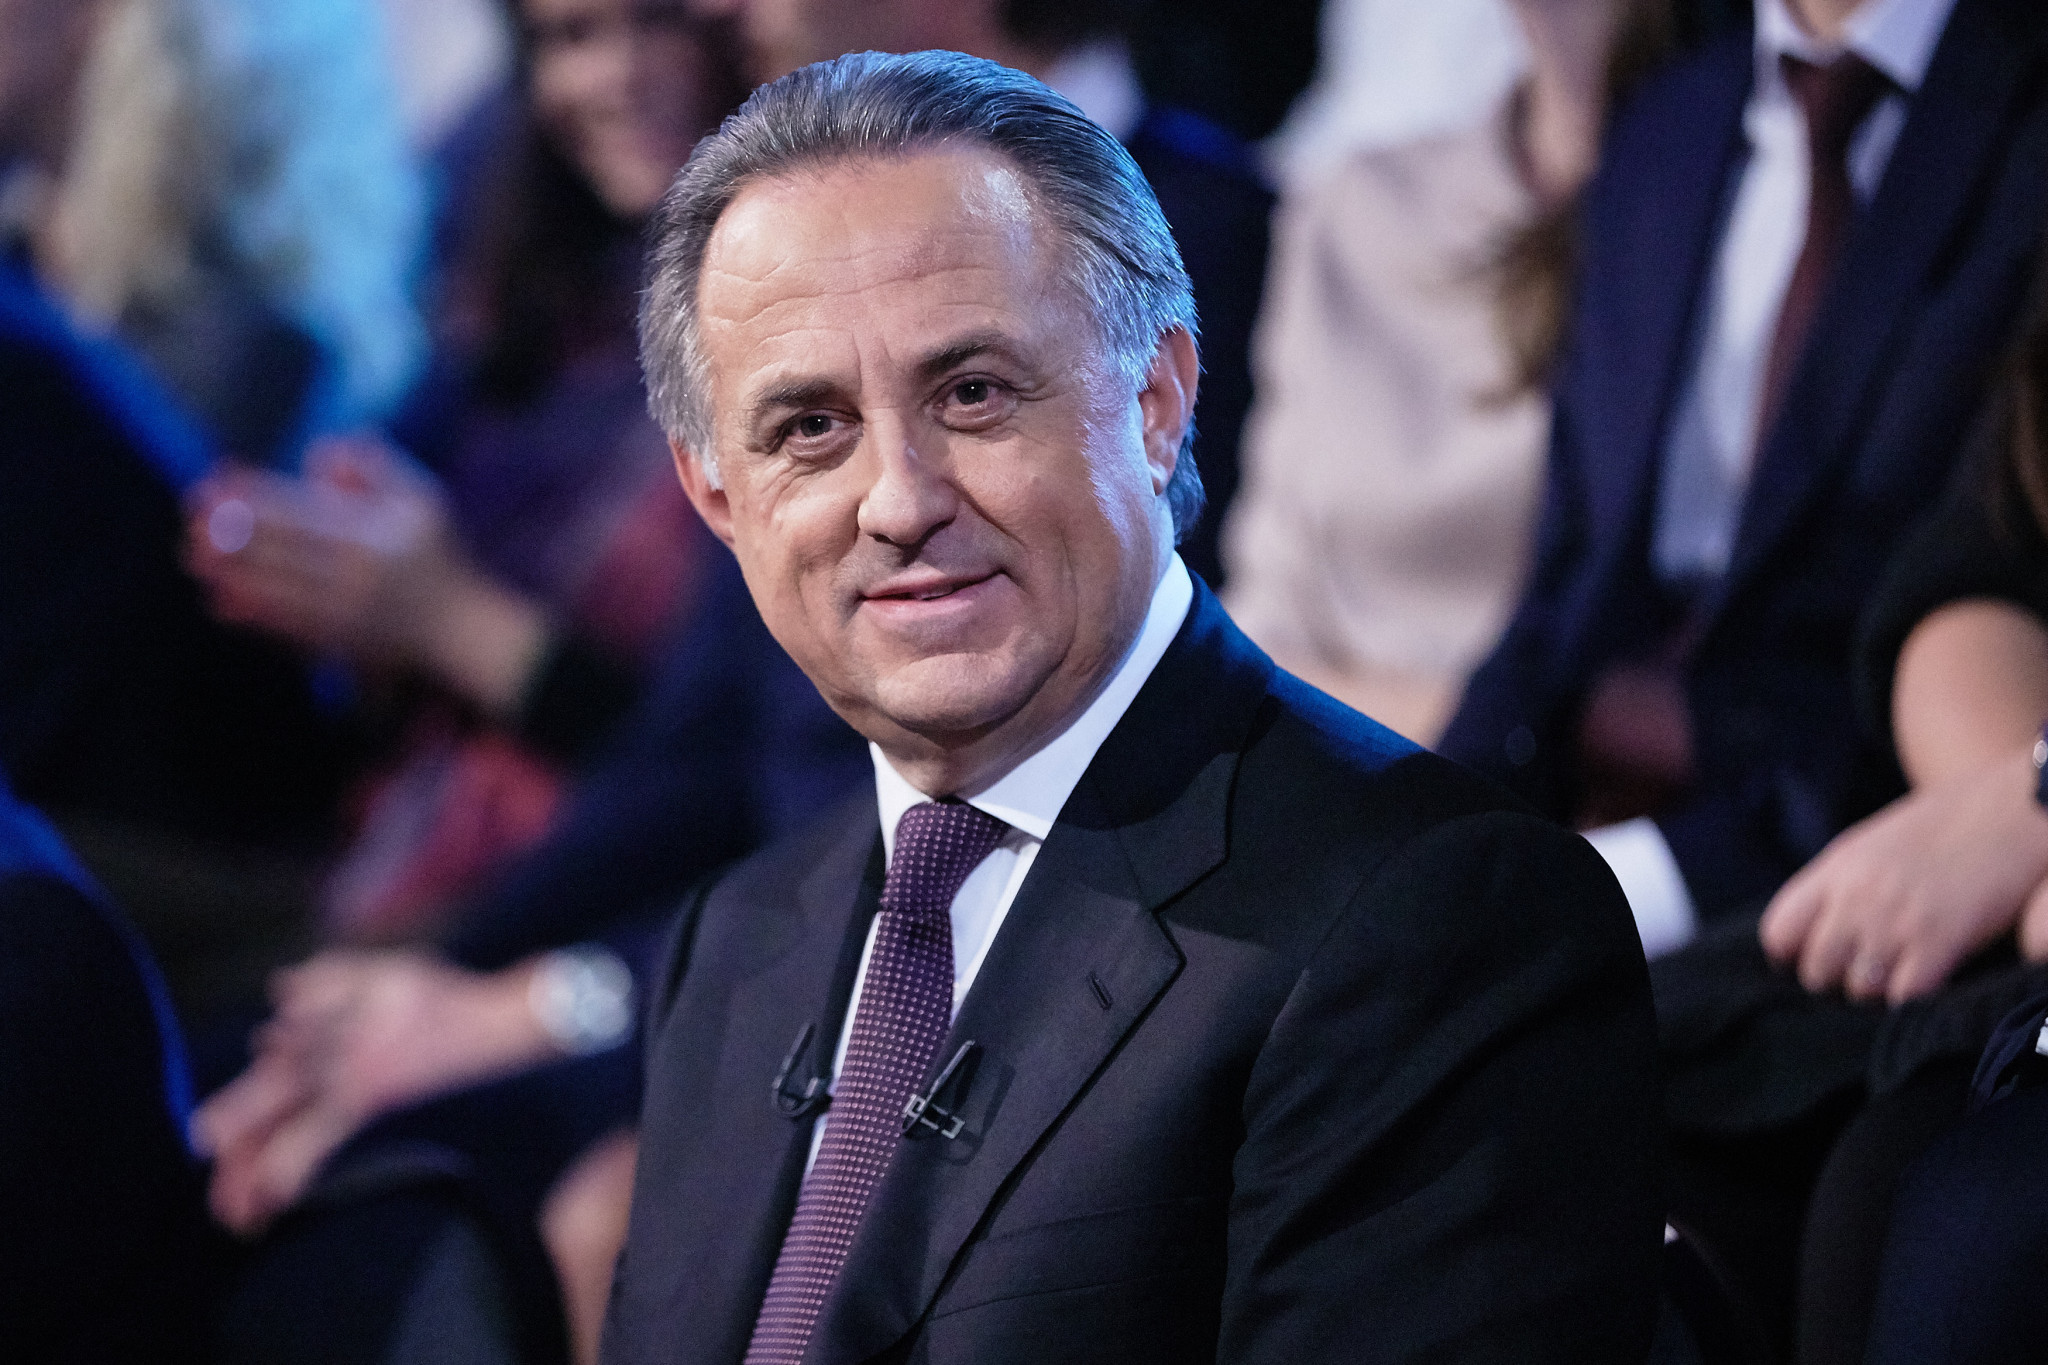 Whistleblower Grigory Rodchenkov has claimed Russia's former Sports Minister Vitaly Mutko was behind a scheme to cover-up drugs tests involving the country's athletes ©Getty Images